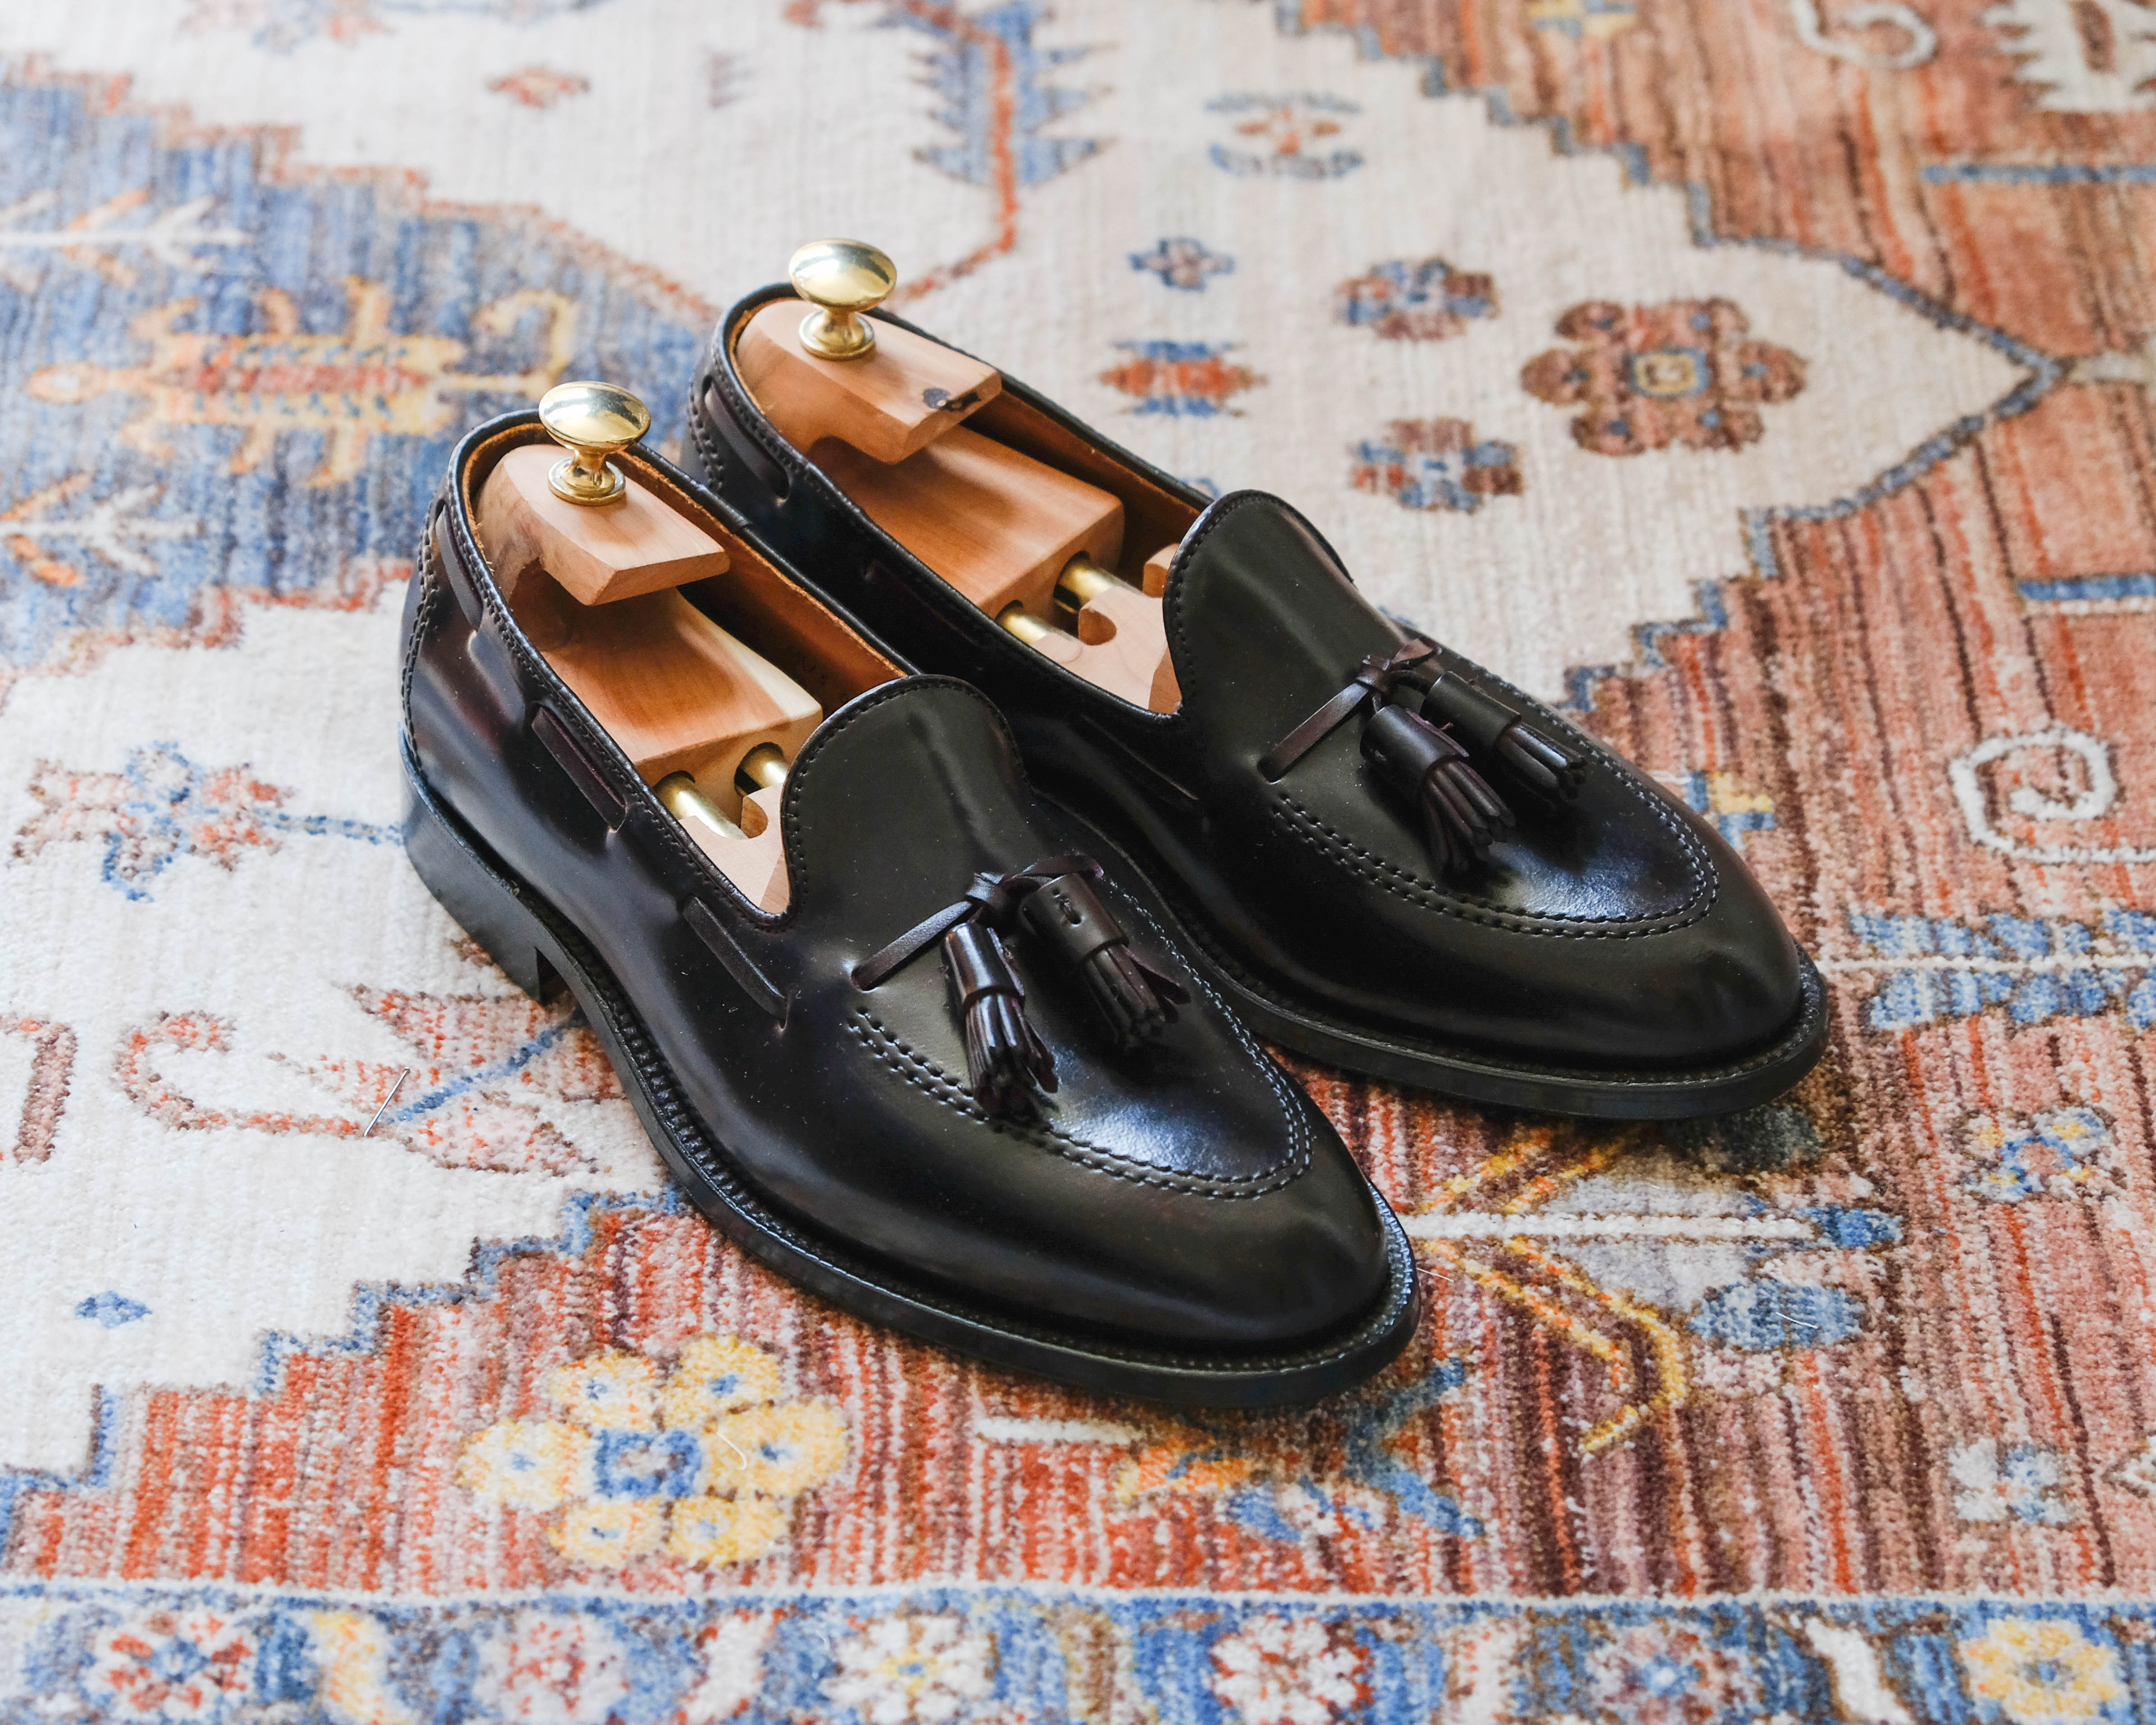 Buying Guide: Tassel Loafers - From Squalor to Baller